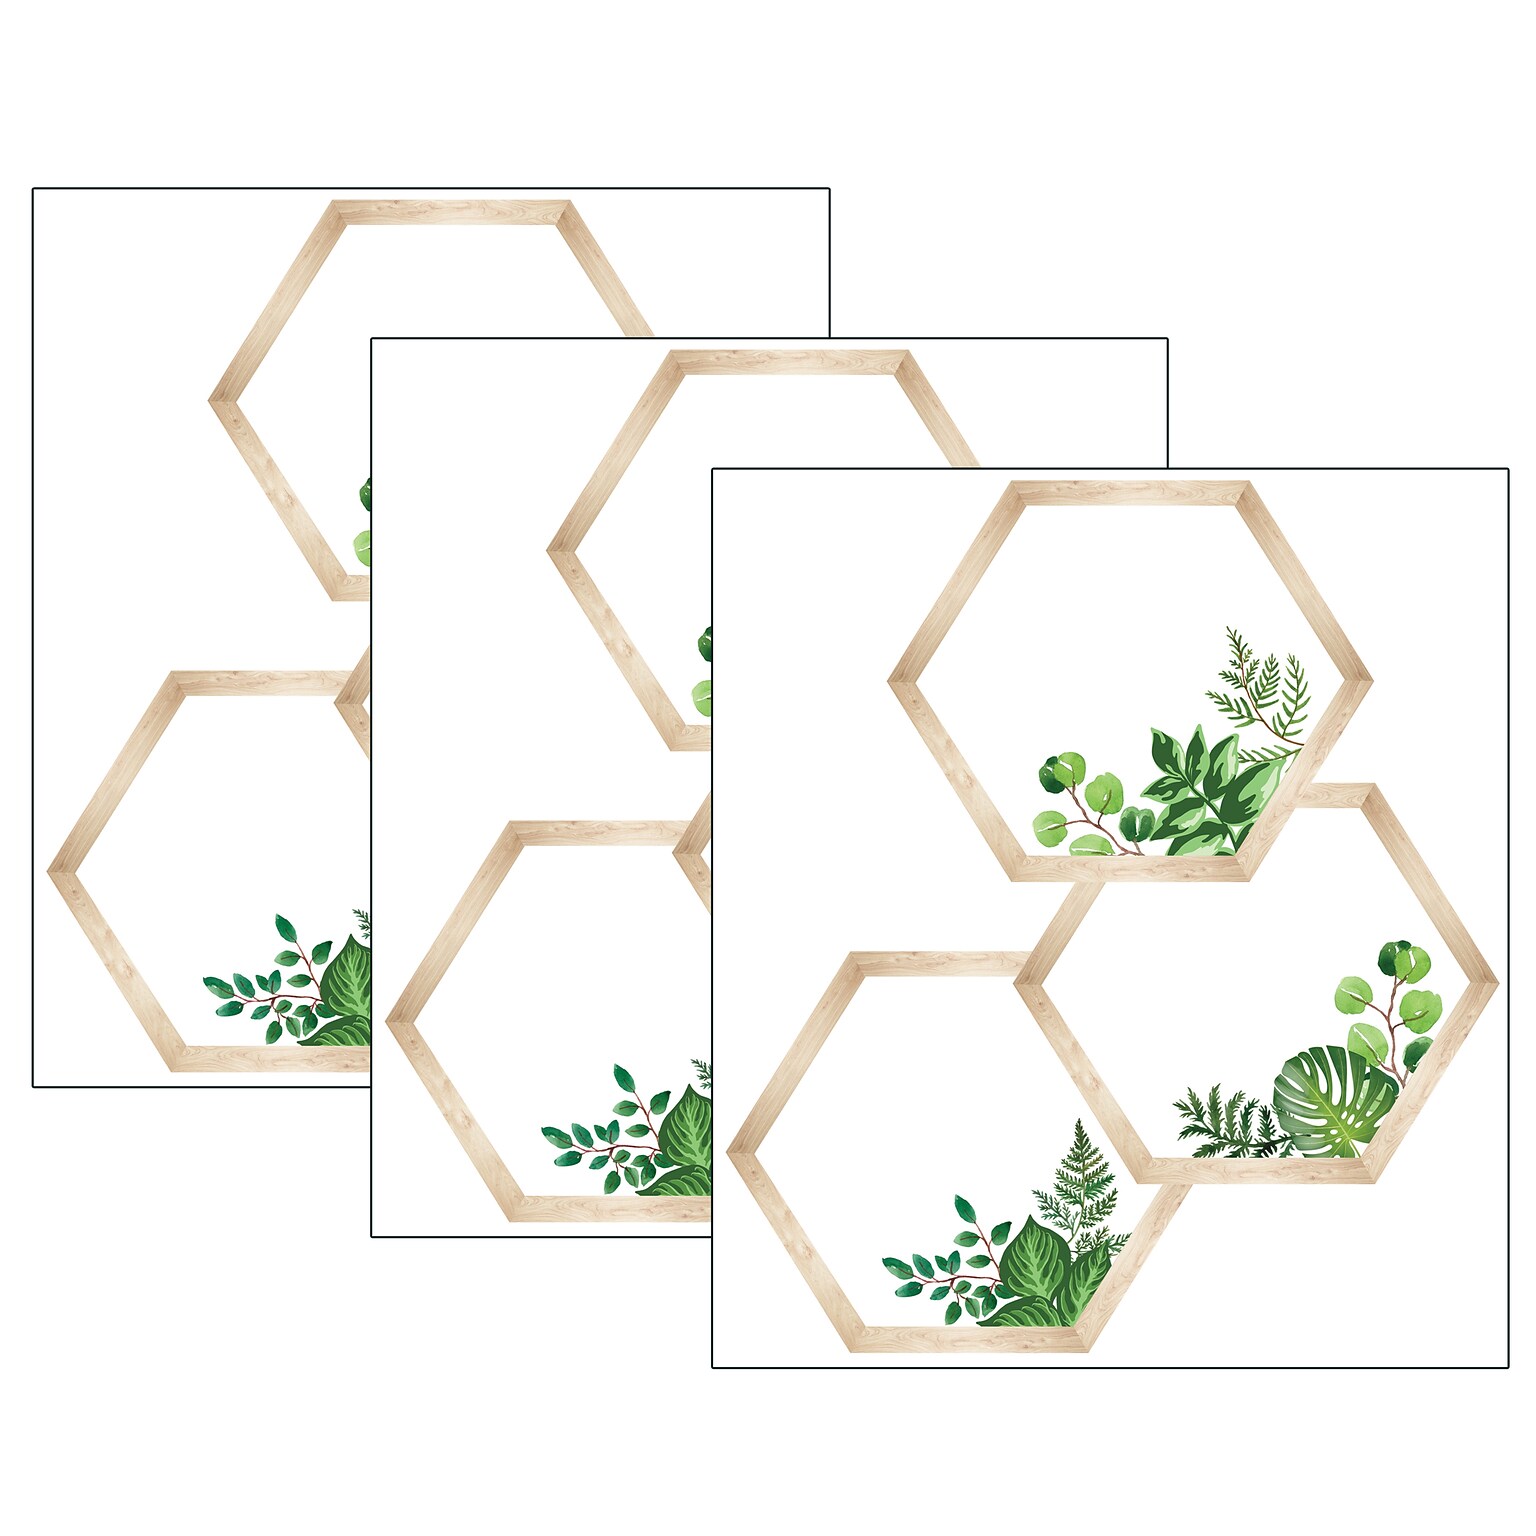 Schoolgirl Style™ Simply Boho Hexagons Cut-Outs, 36 Per Pack, 3 Packs (CD-120612-3)